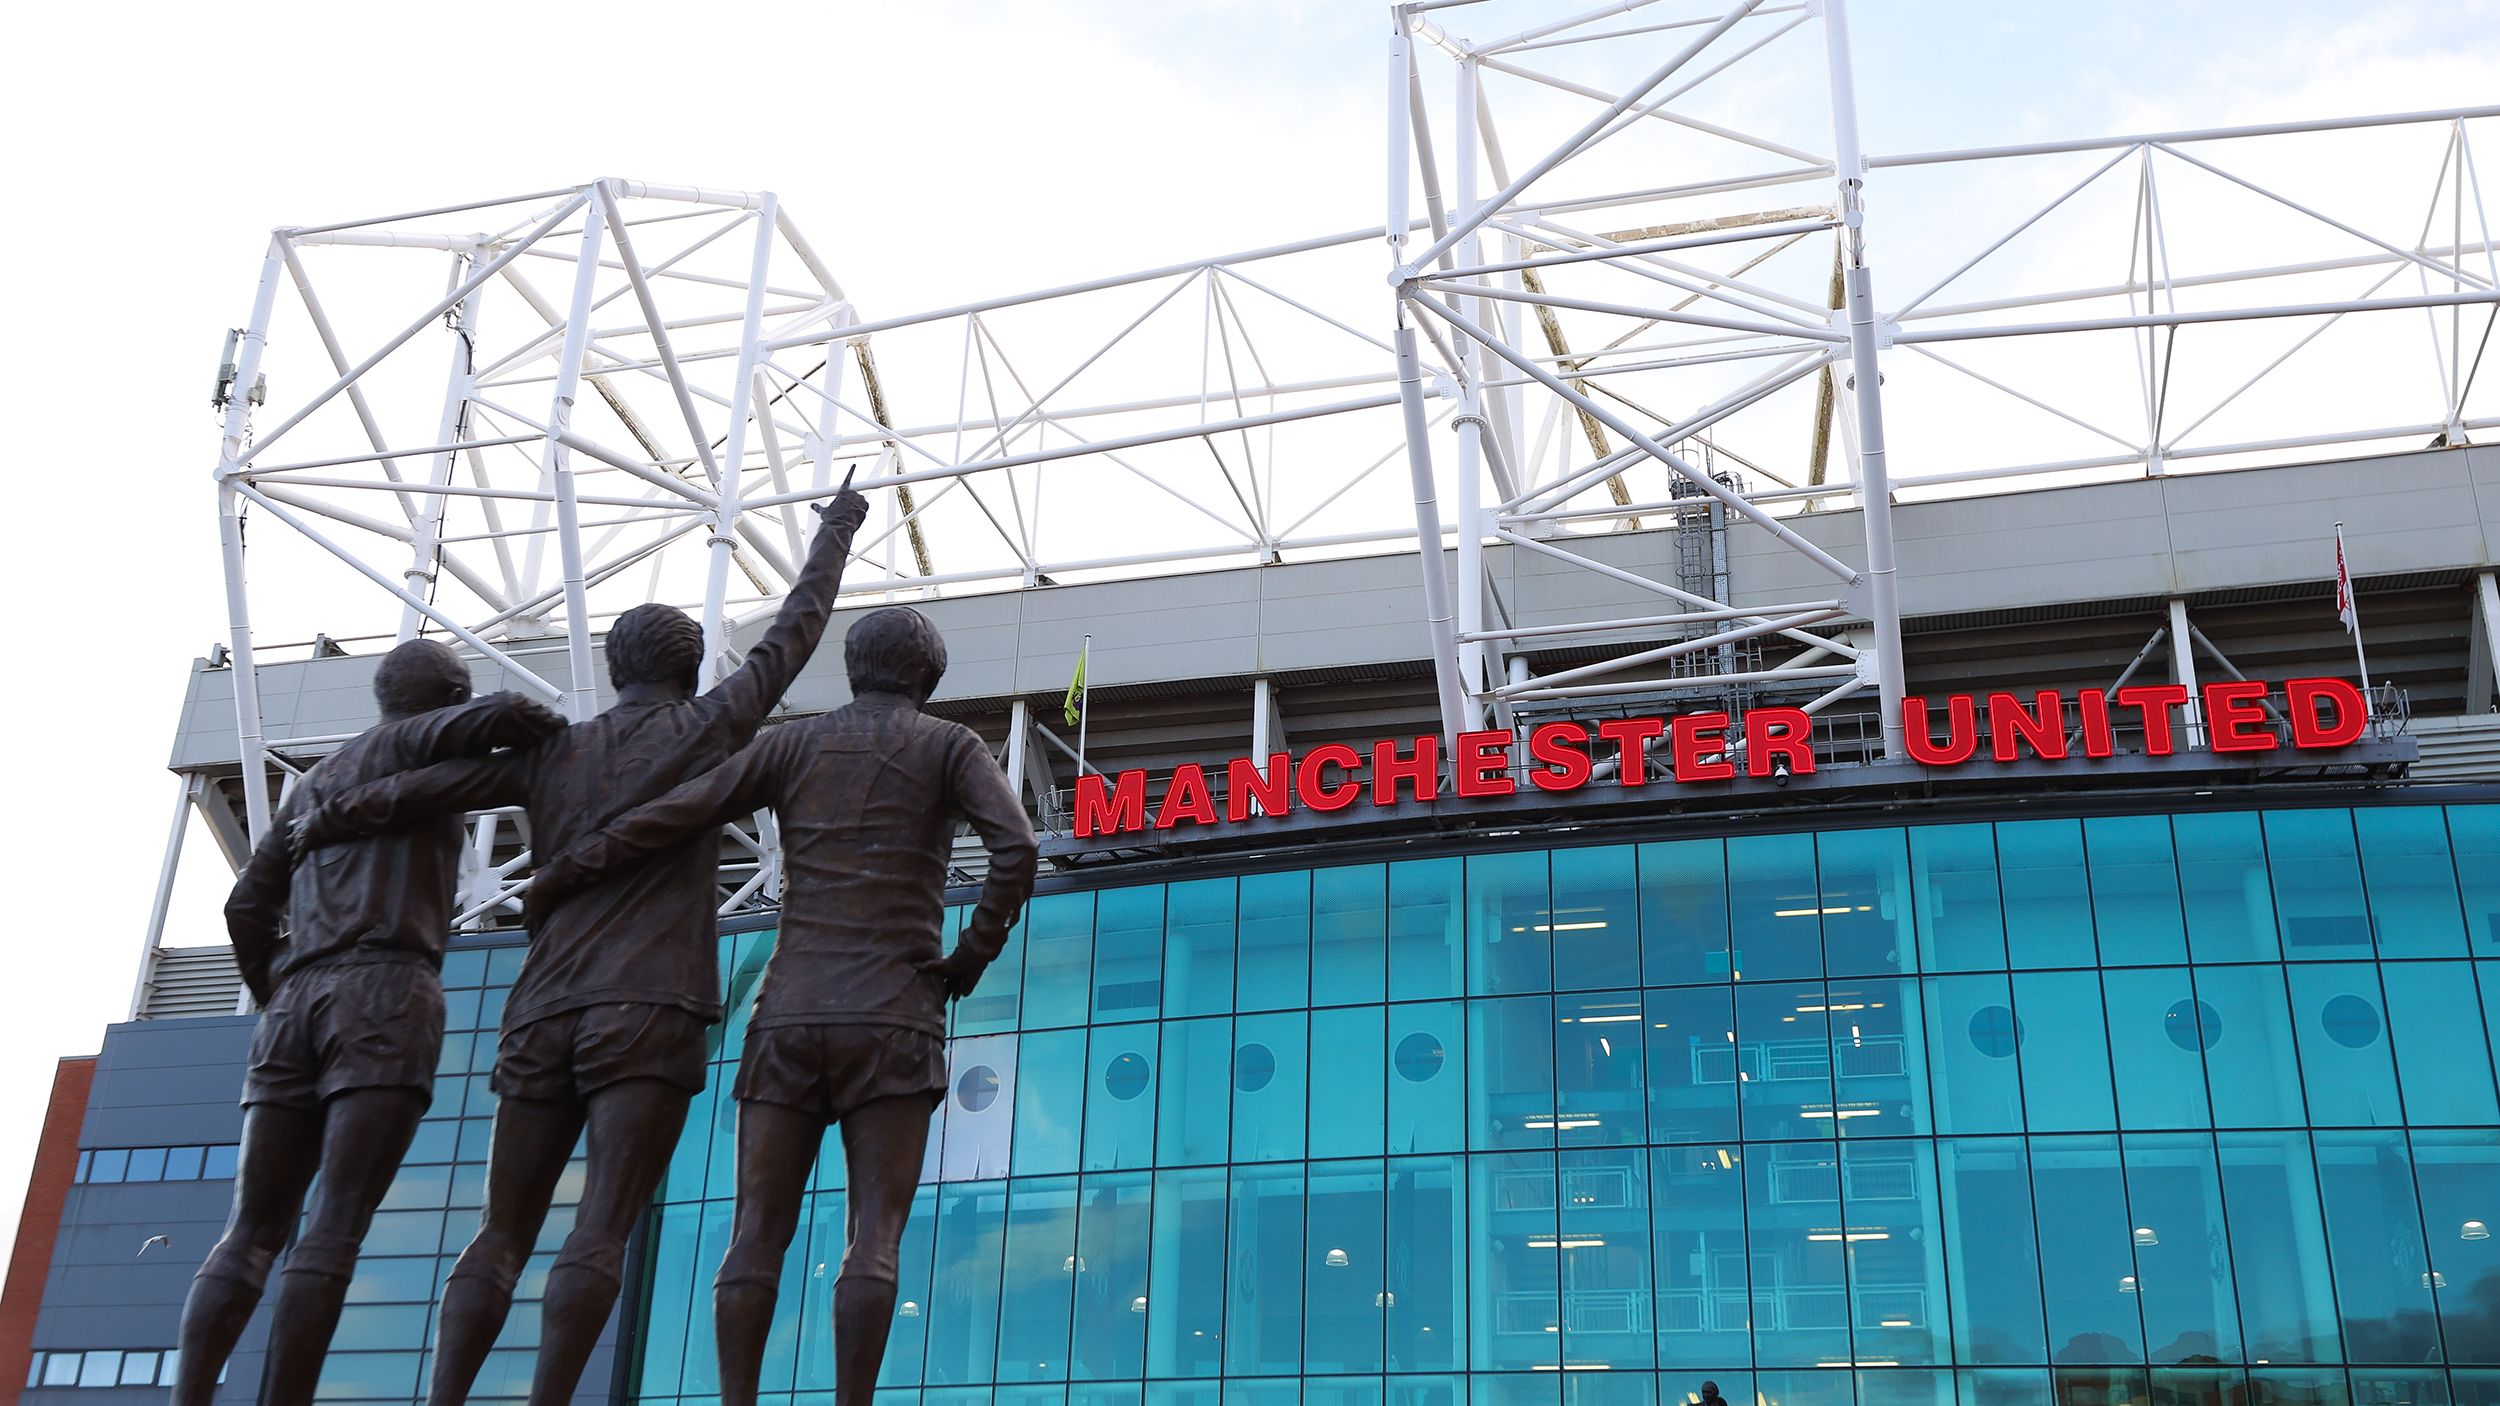 With a capacity of 74,310, United's Old Trafford stadium is the biggest club stadium in the UK.